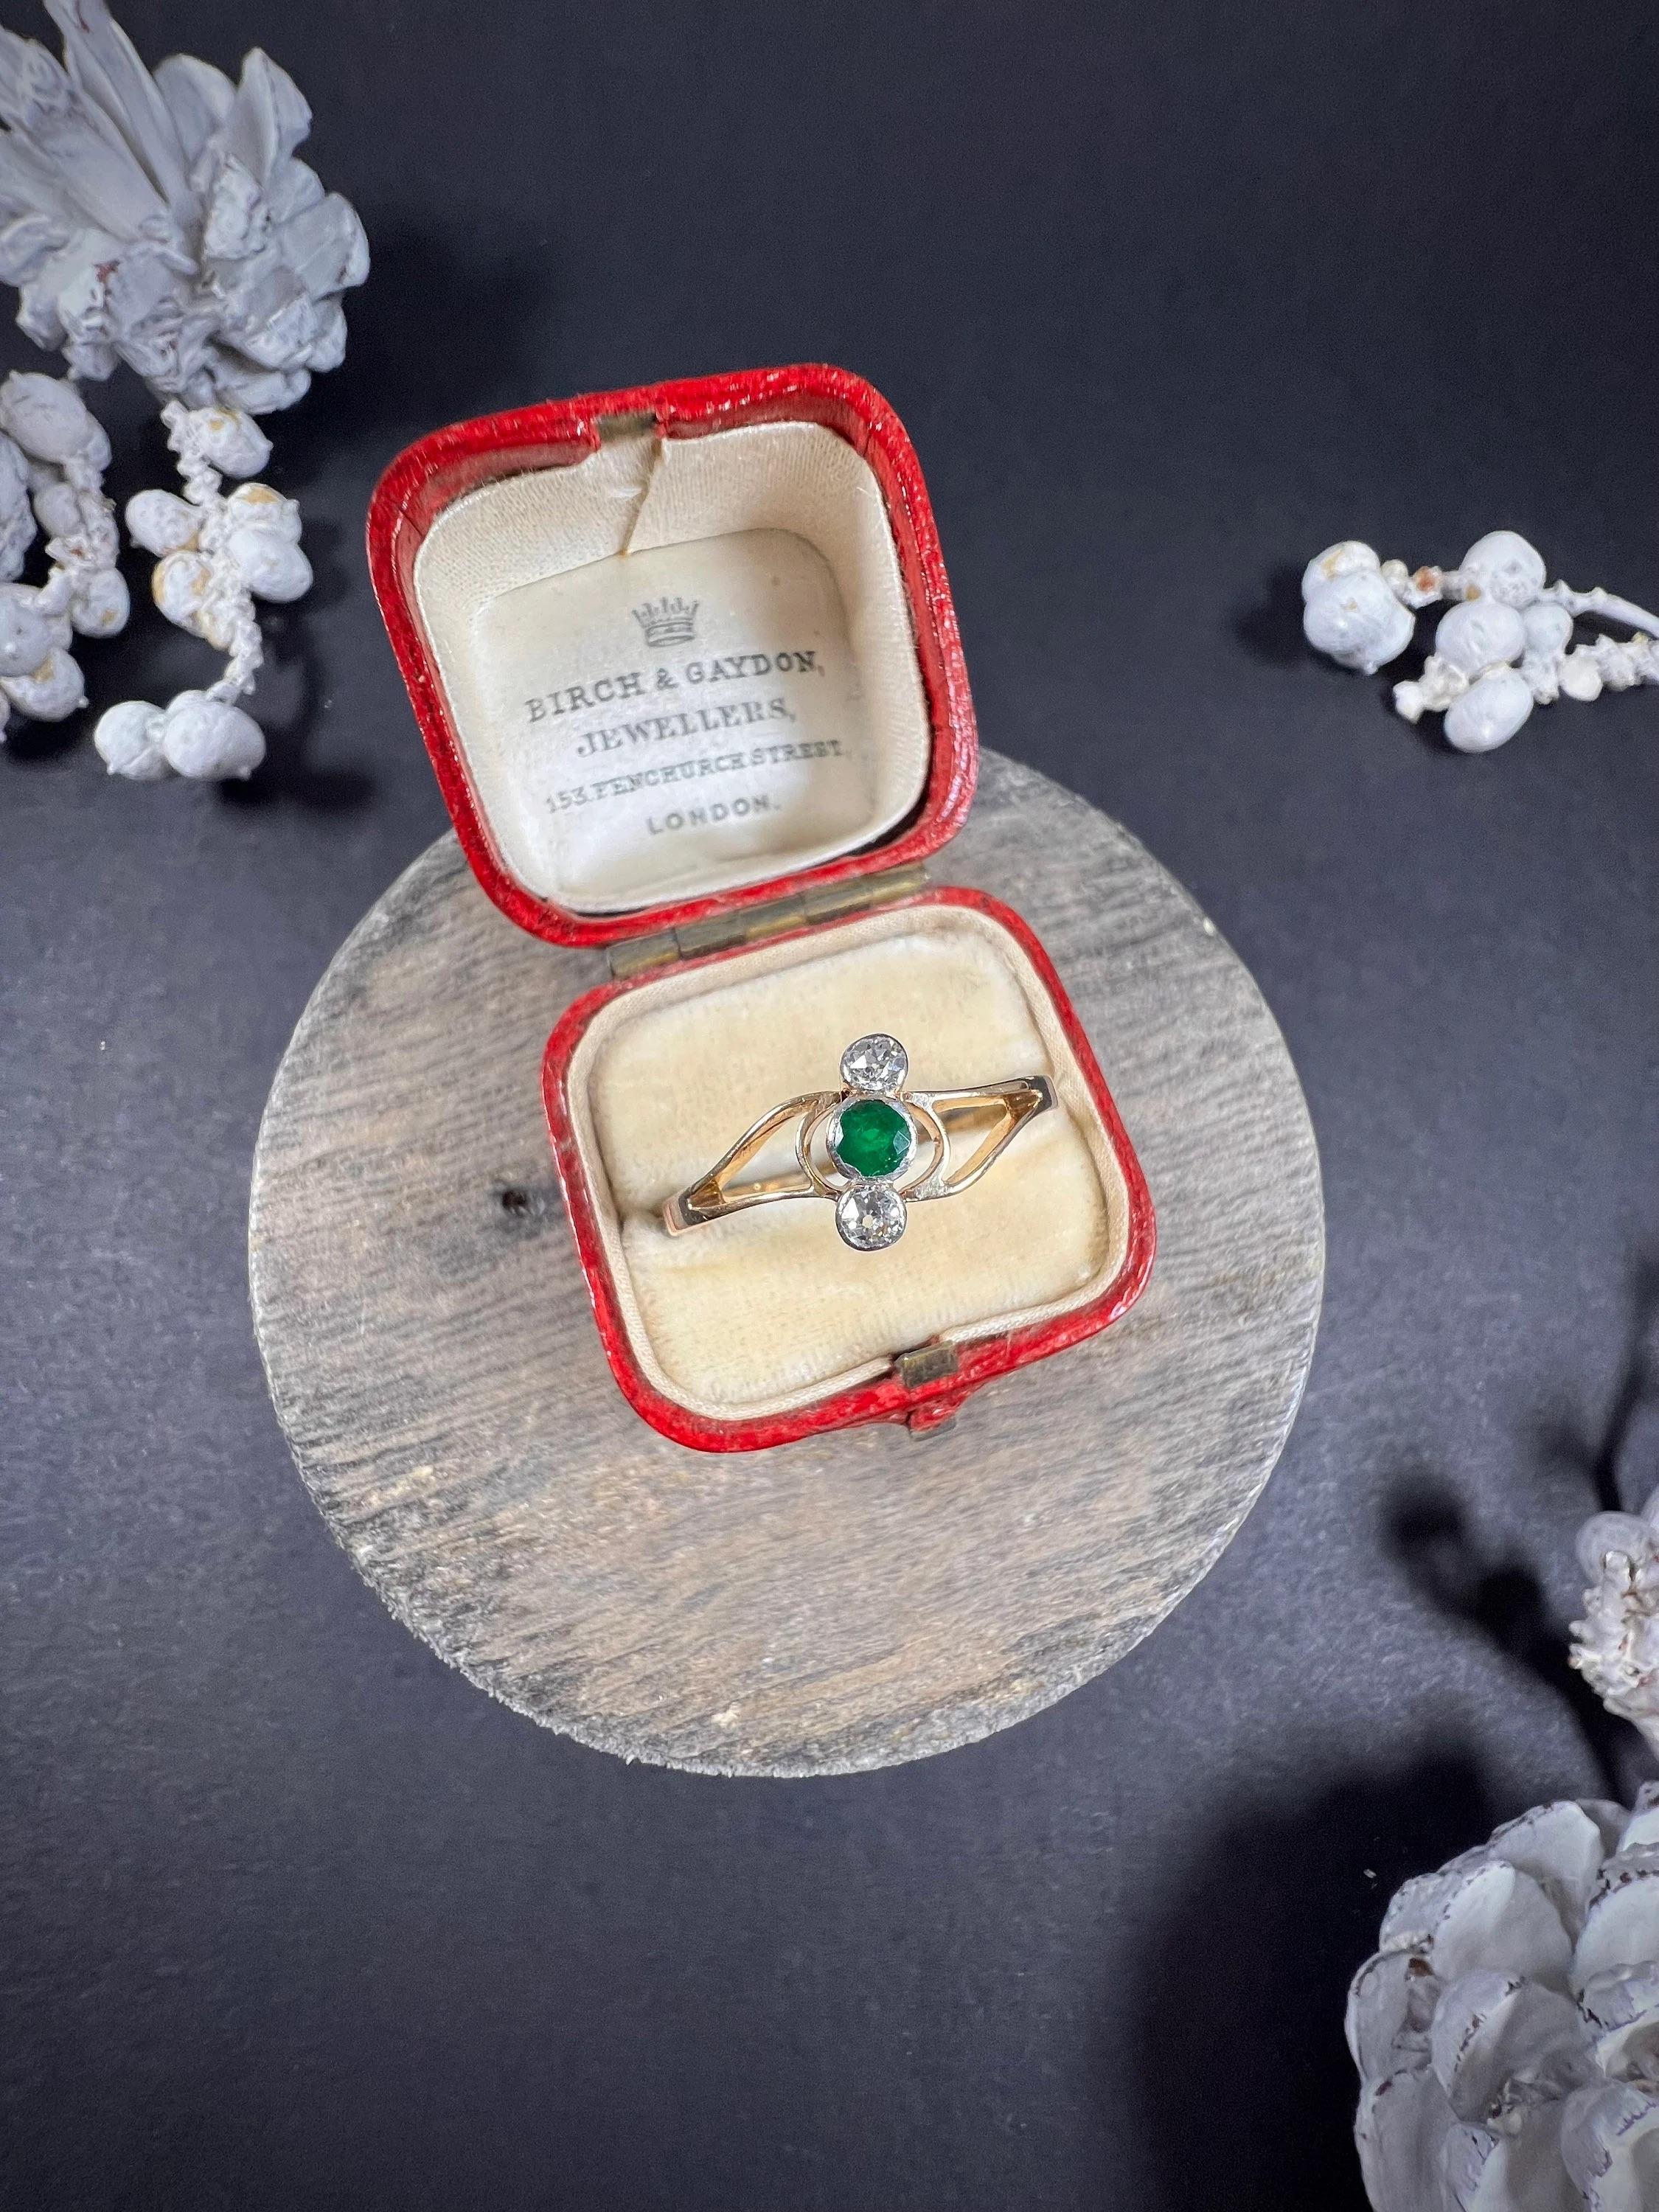 Antique Emerald & Diamond Crossover Ring

18ct Gold & Platinum Stamped 

Circa 1920s

This exquisite 18ct gold stamped ring is a stunning representation of the 1920s era. Featuring a beautiful emerald and diamond three-stone design, the stones are